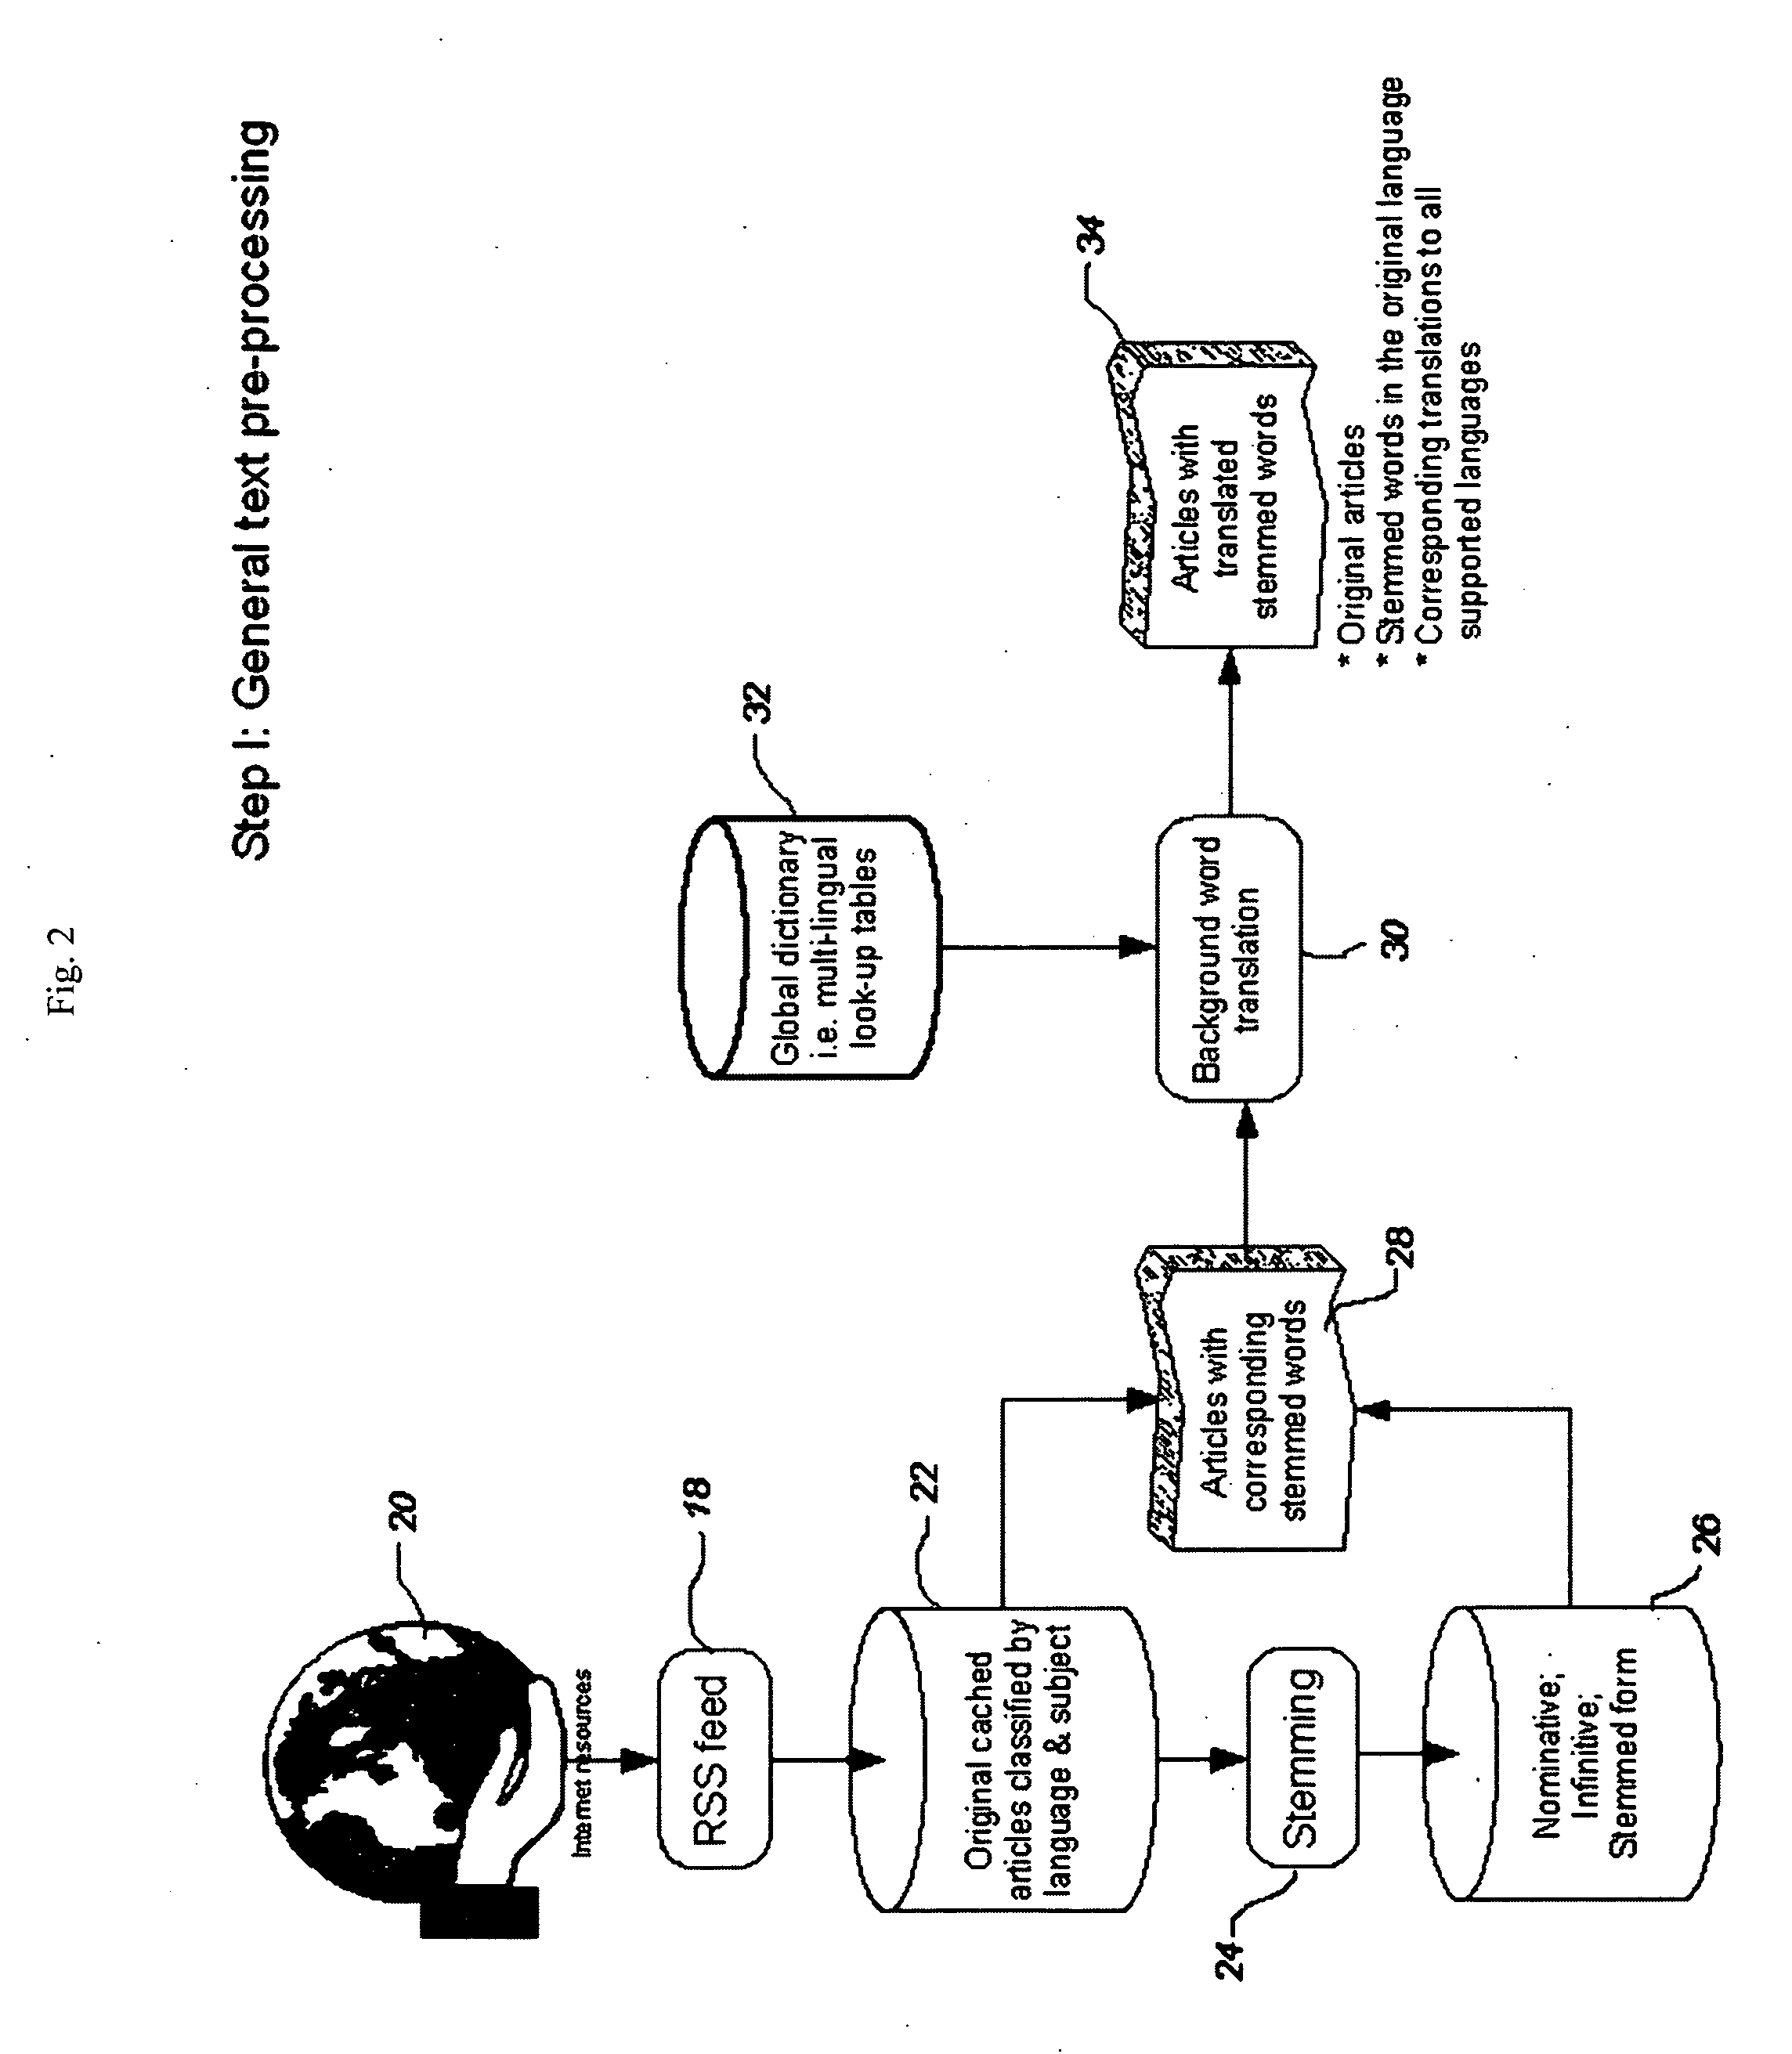 Personalized system and method for teaching a foreign language